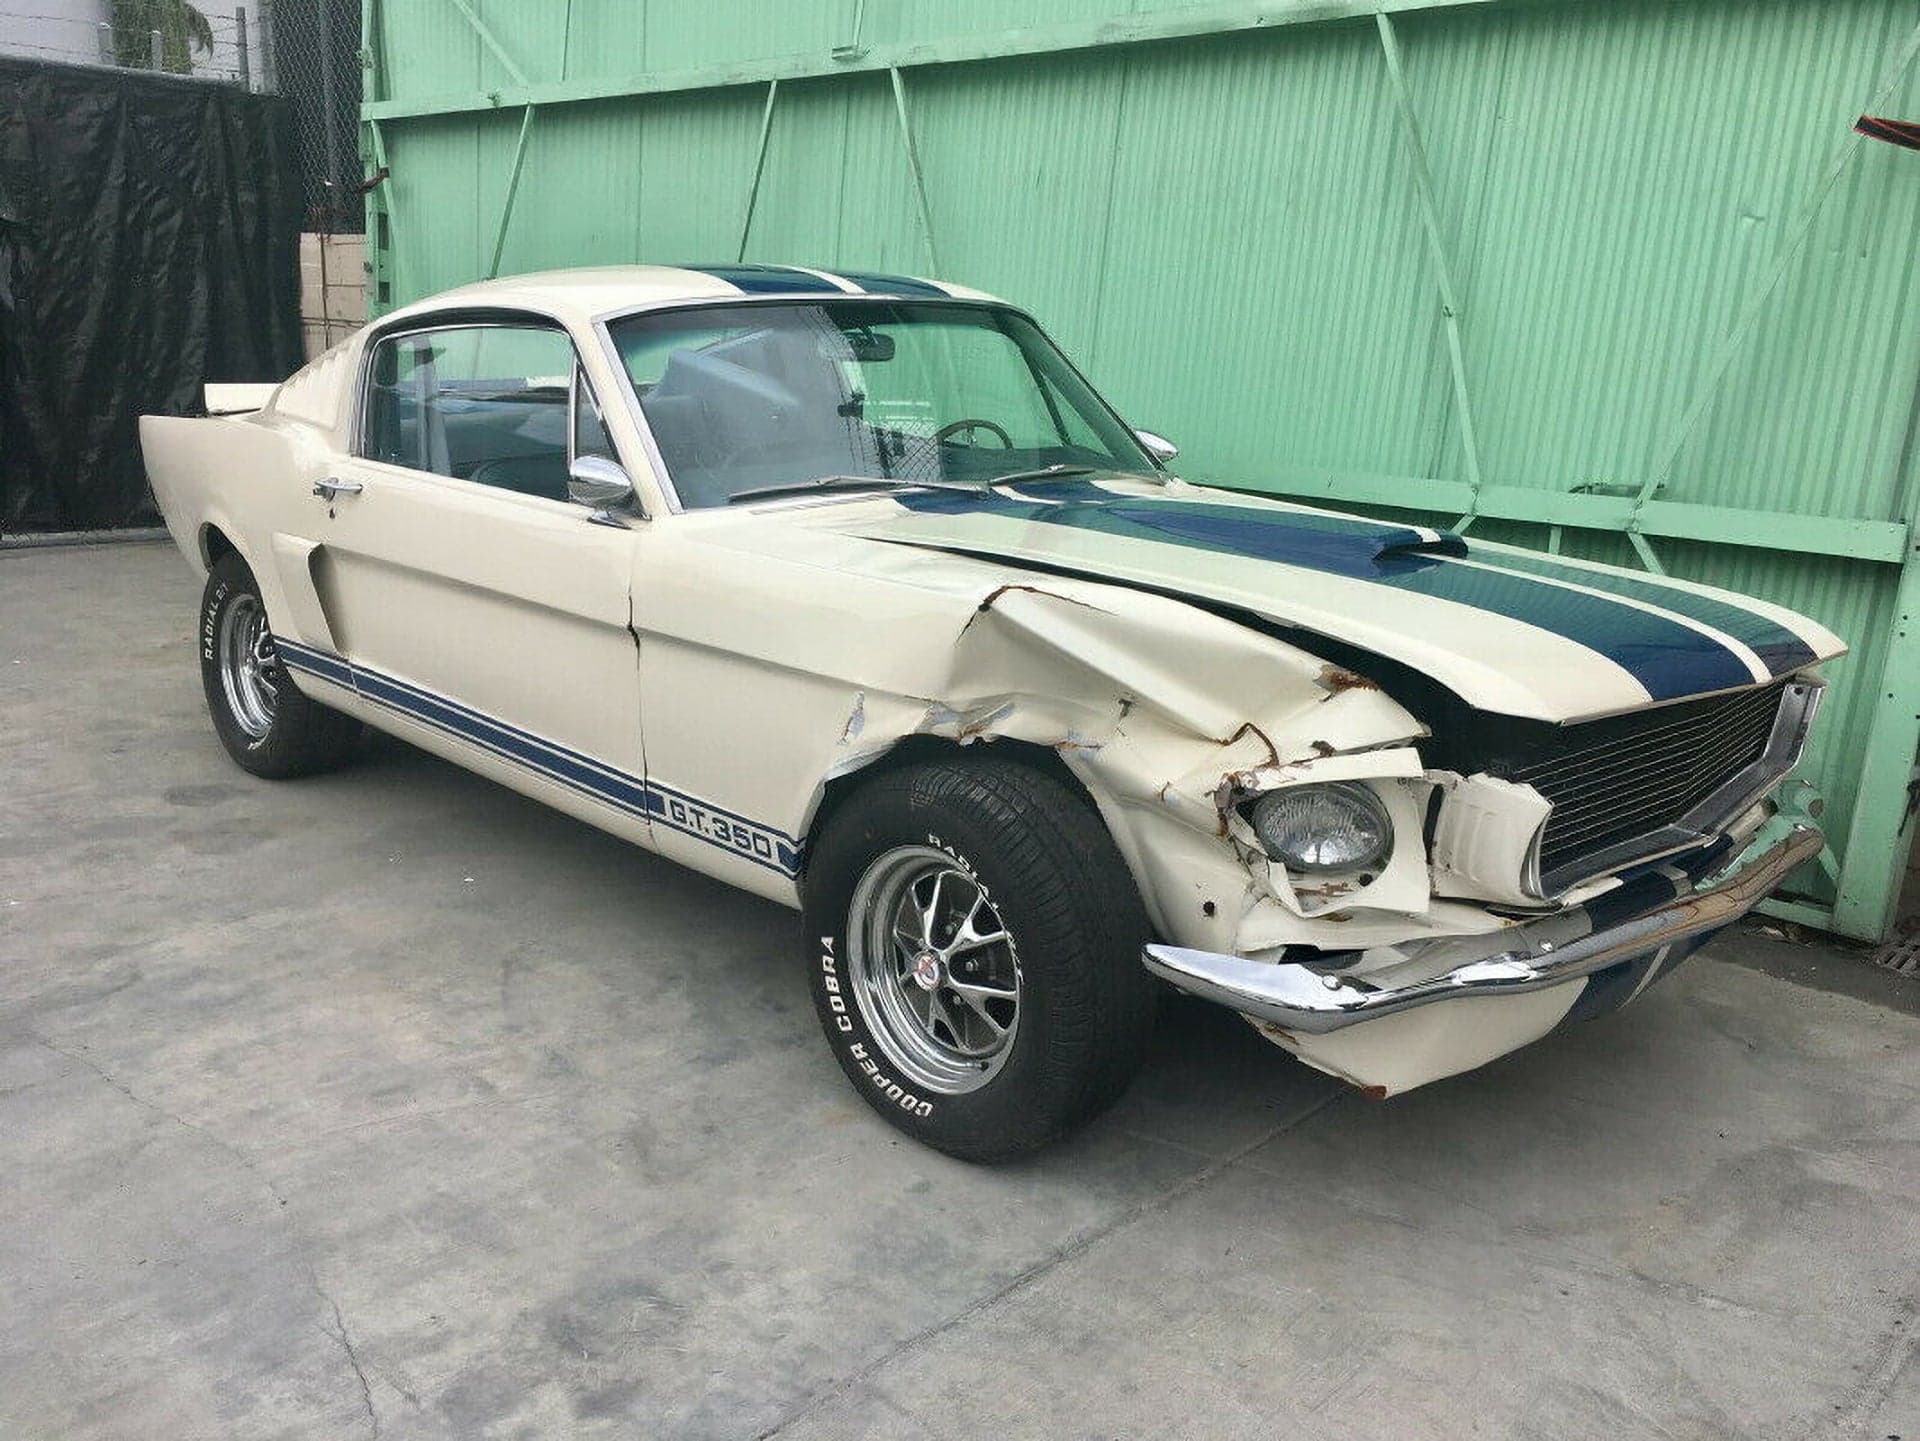 Crashed 1966 Ford Mustang Shelby GT350 Fastback Tribute Car Hits eBay